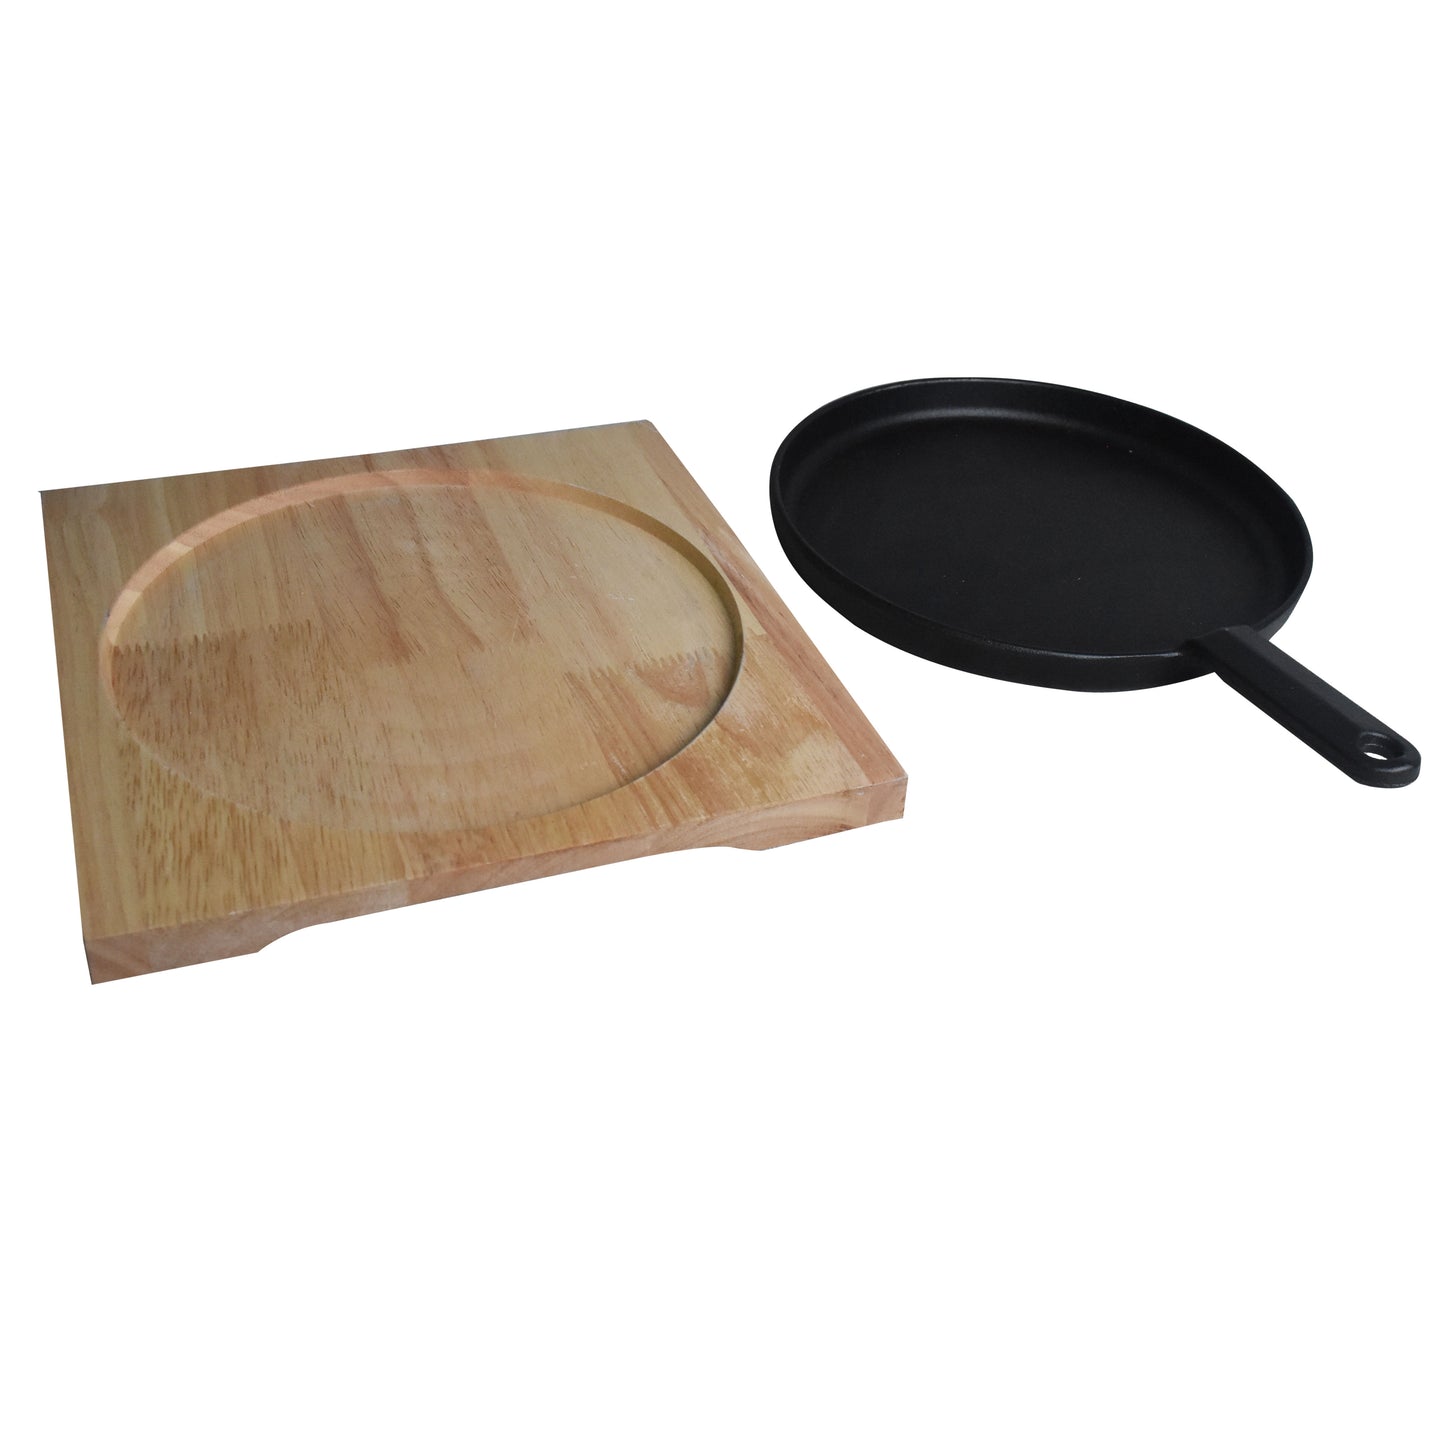 Round Cast Iron Sizzler Pan 24cm With Handle And Wooden Base